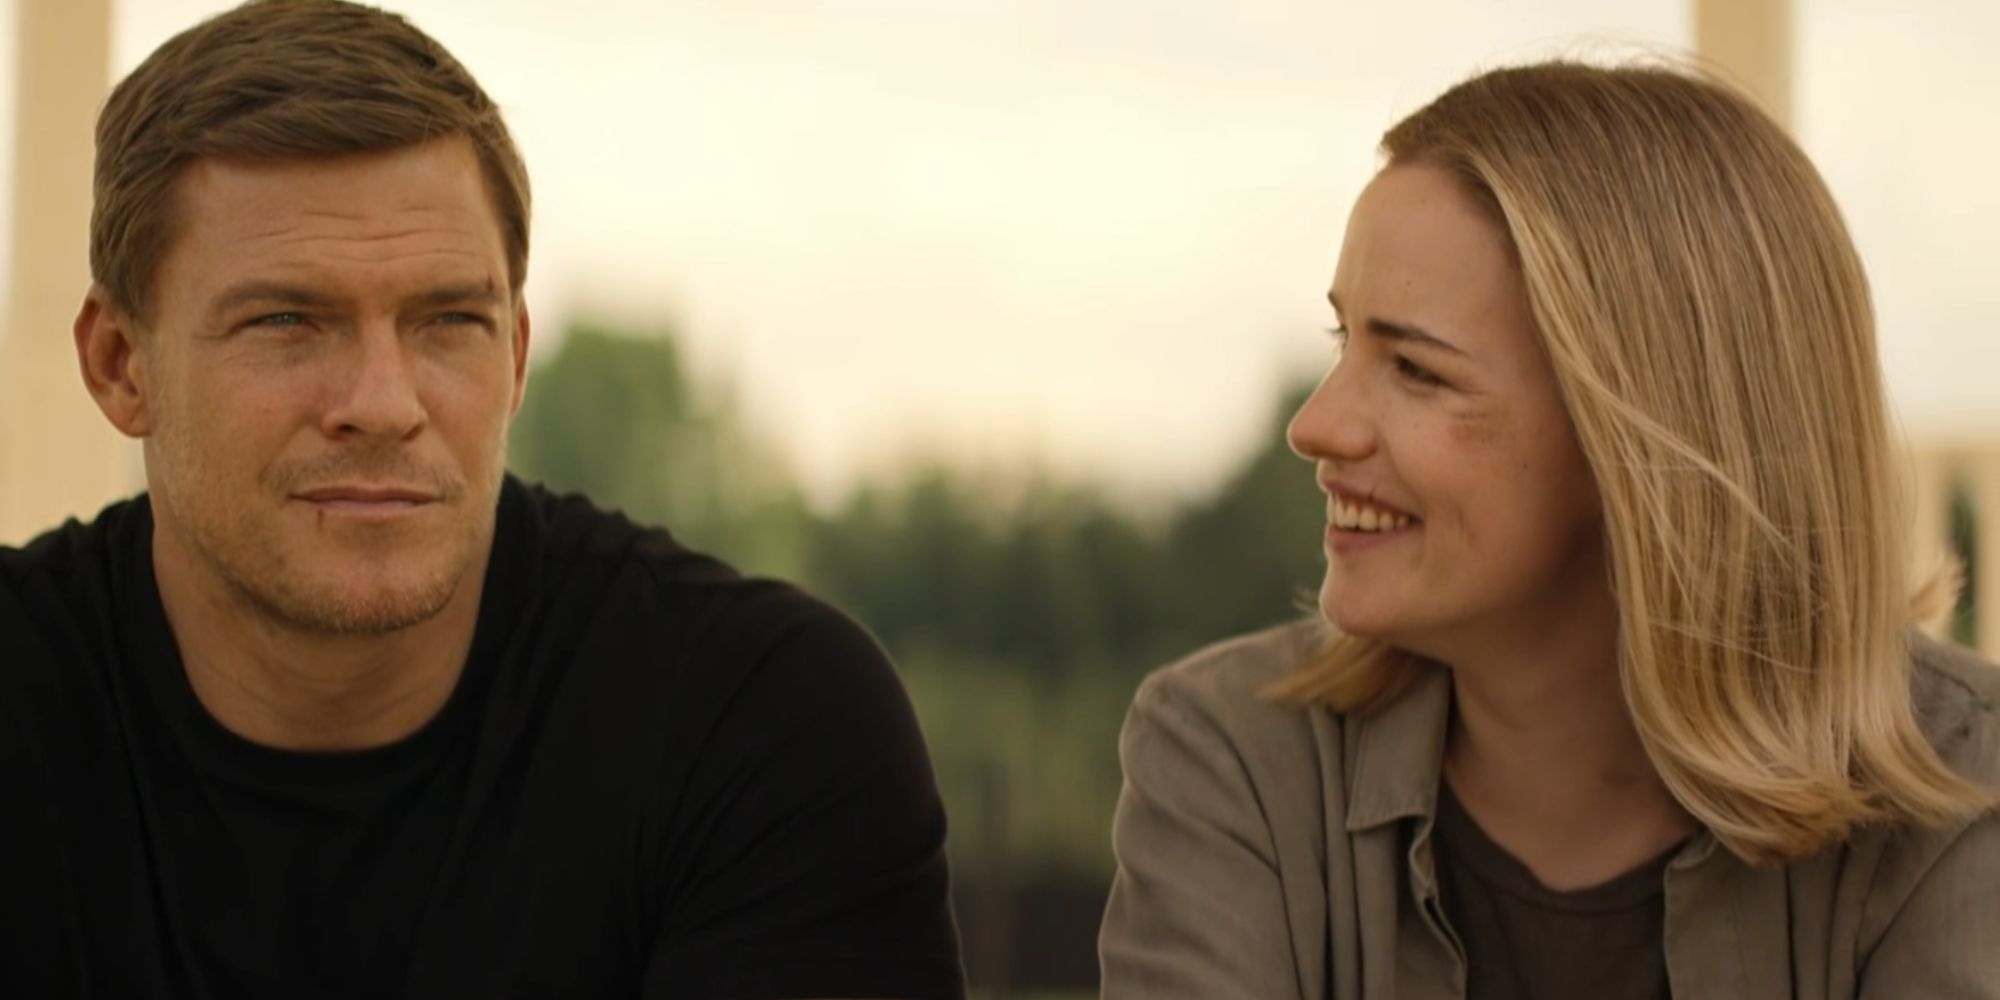 A smiling Willa Fitzgerald as Roscoe Conklin looking at Ben Ritchson as Reacher